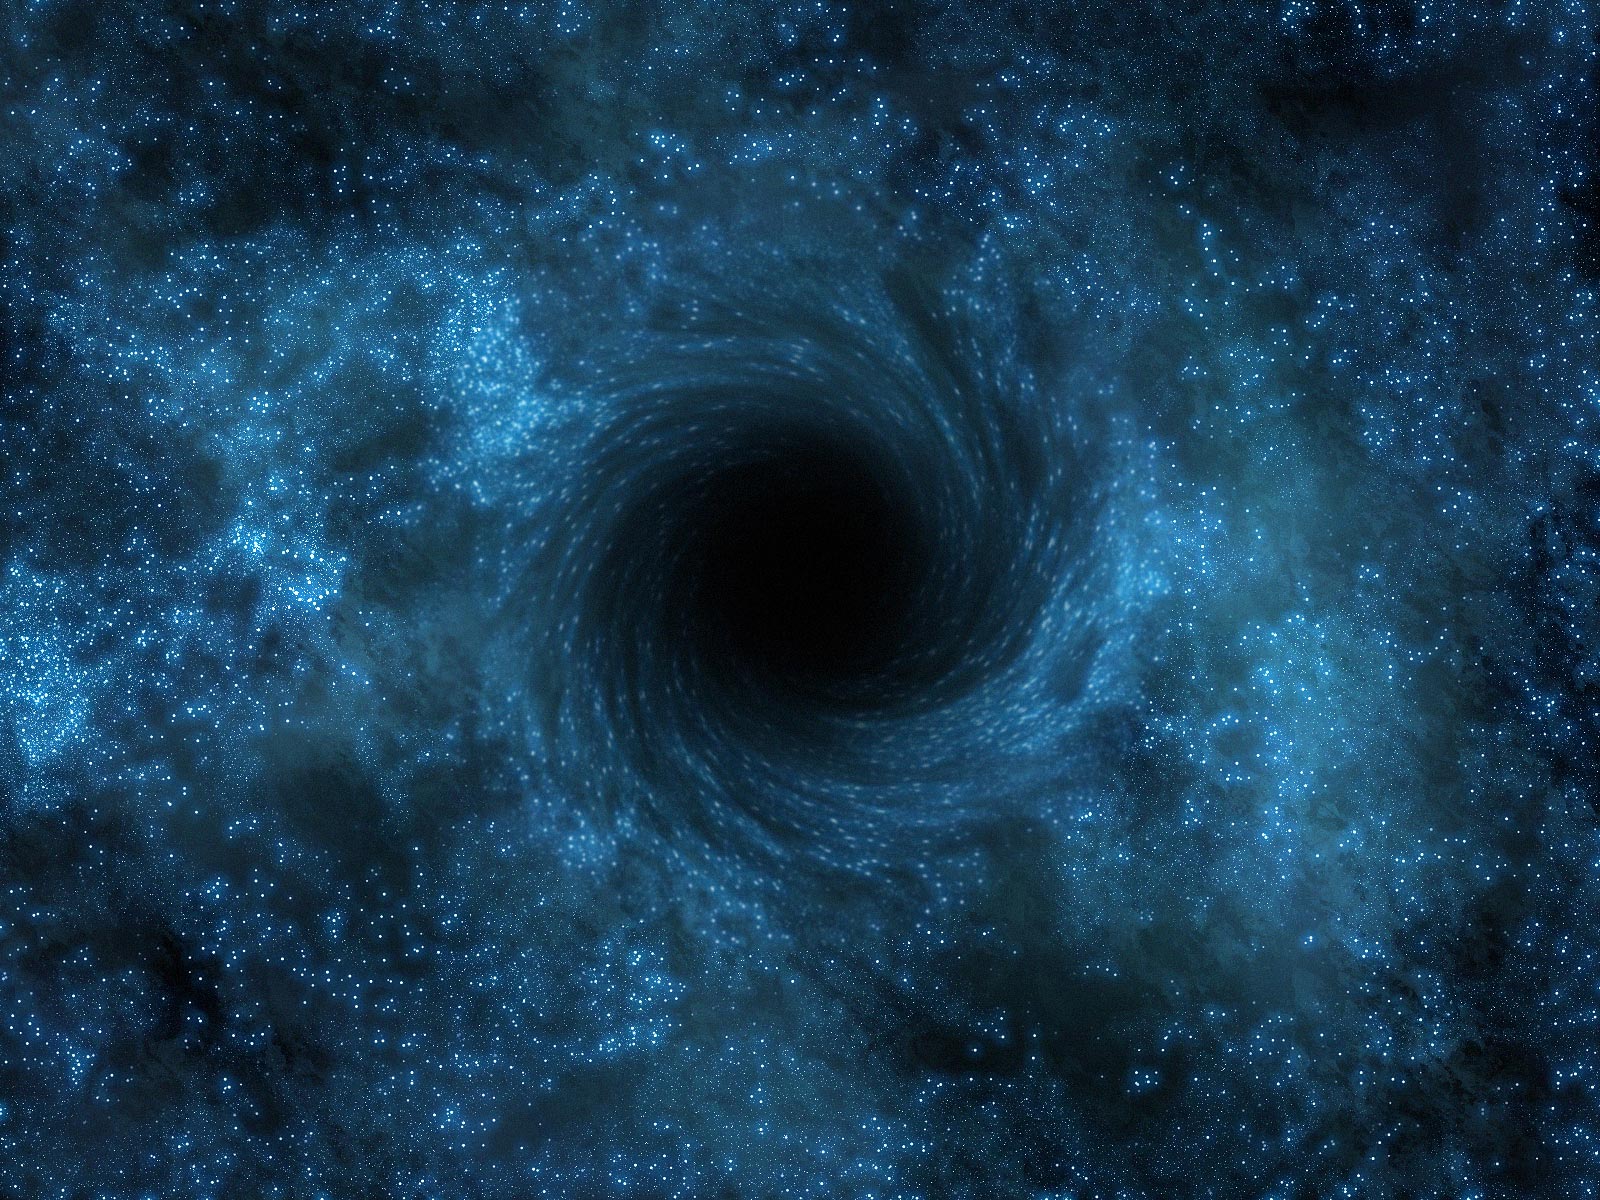 Scientists find gigantic black hole that may have devoured its neighbors